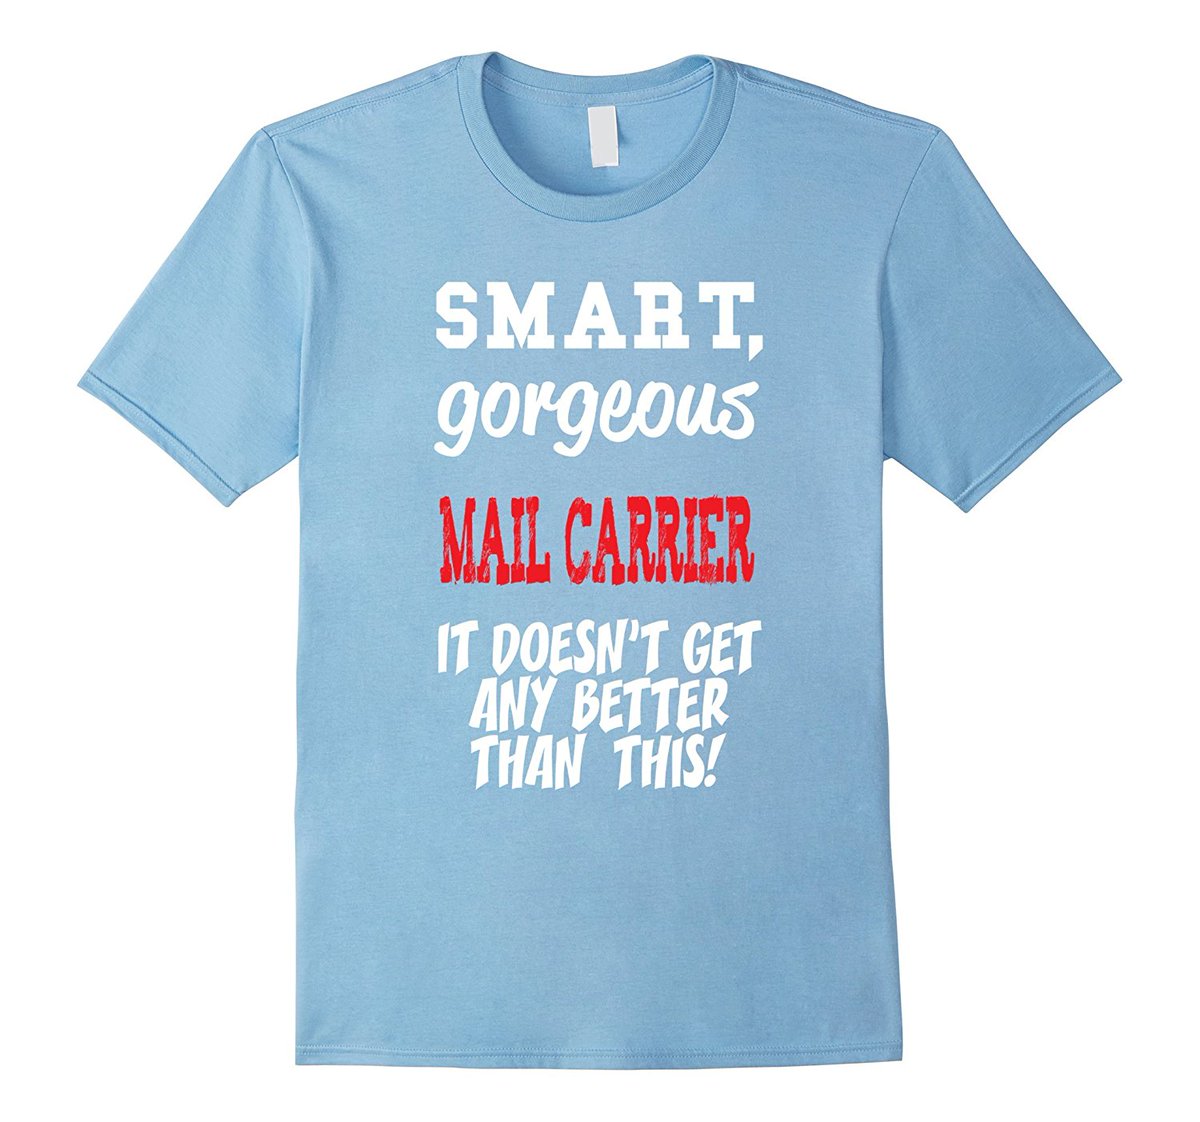 #Mail Carrier Gift T-Shirt - Smart, Gorgeous - #Postalworker amzn.to/2F6bOx9 #